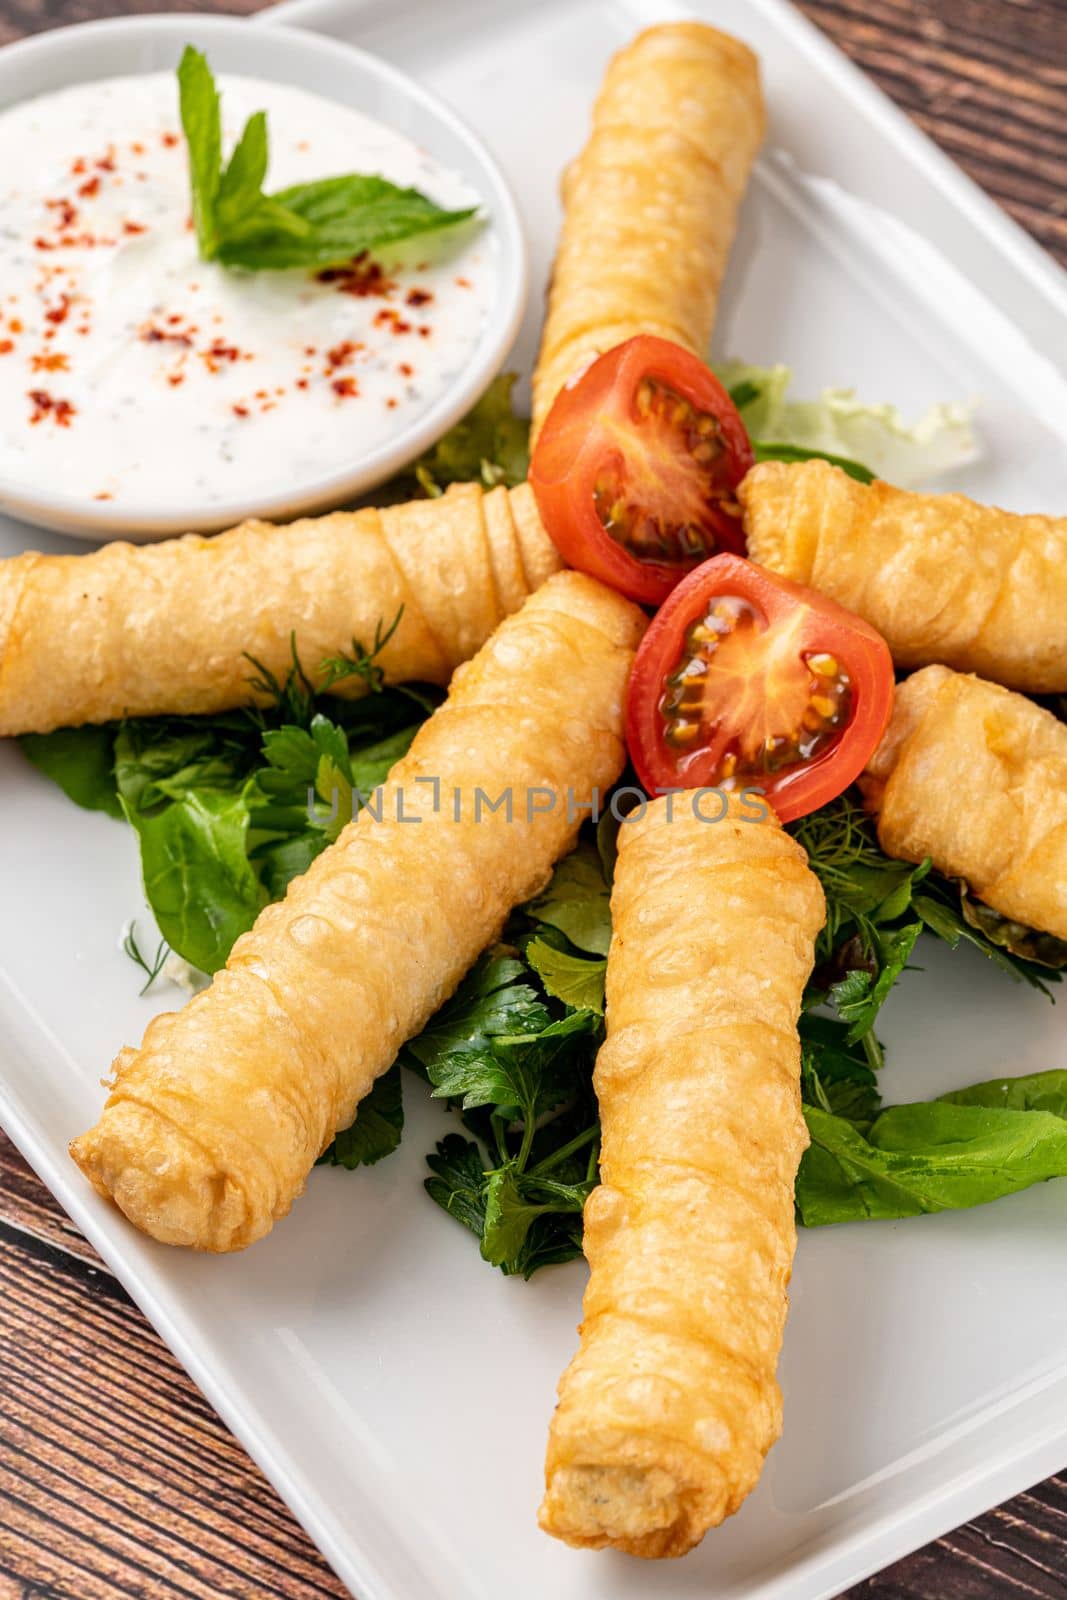 Turkish Cigar Shaped Rolls on a white porcelain plate. The Turkish name is Sigara Boregi by Sonat